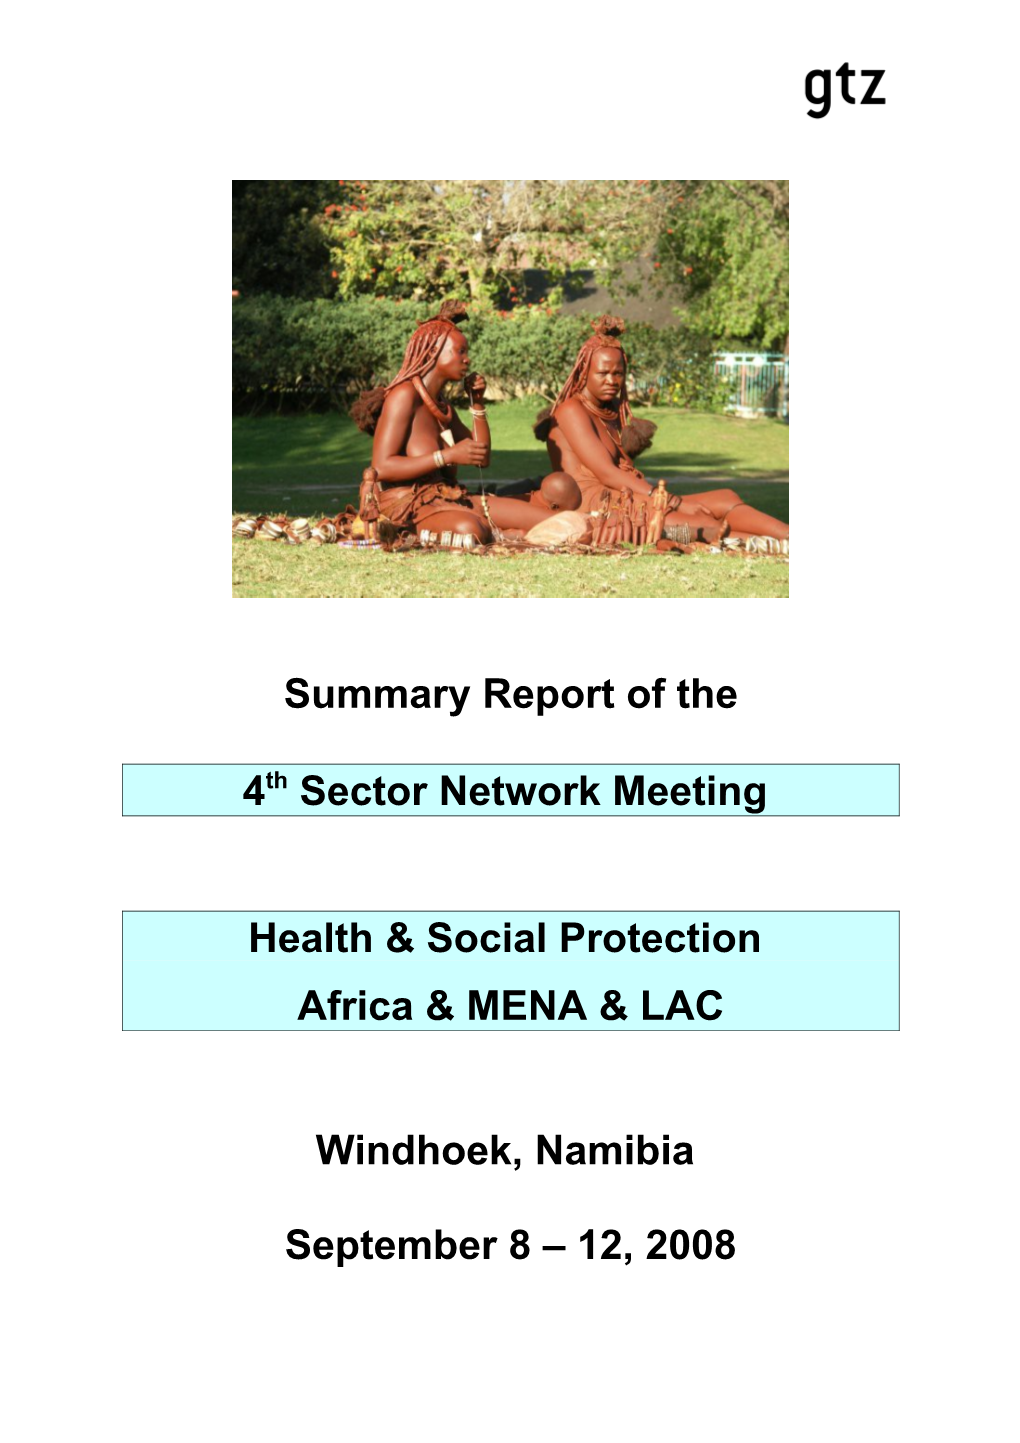 Summary Report of 4Th Sector Network Meeting